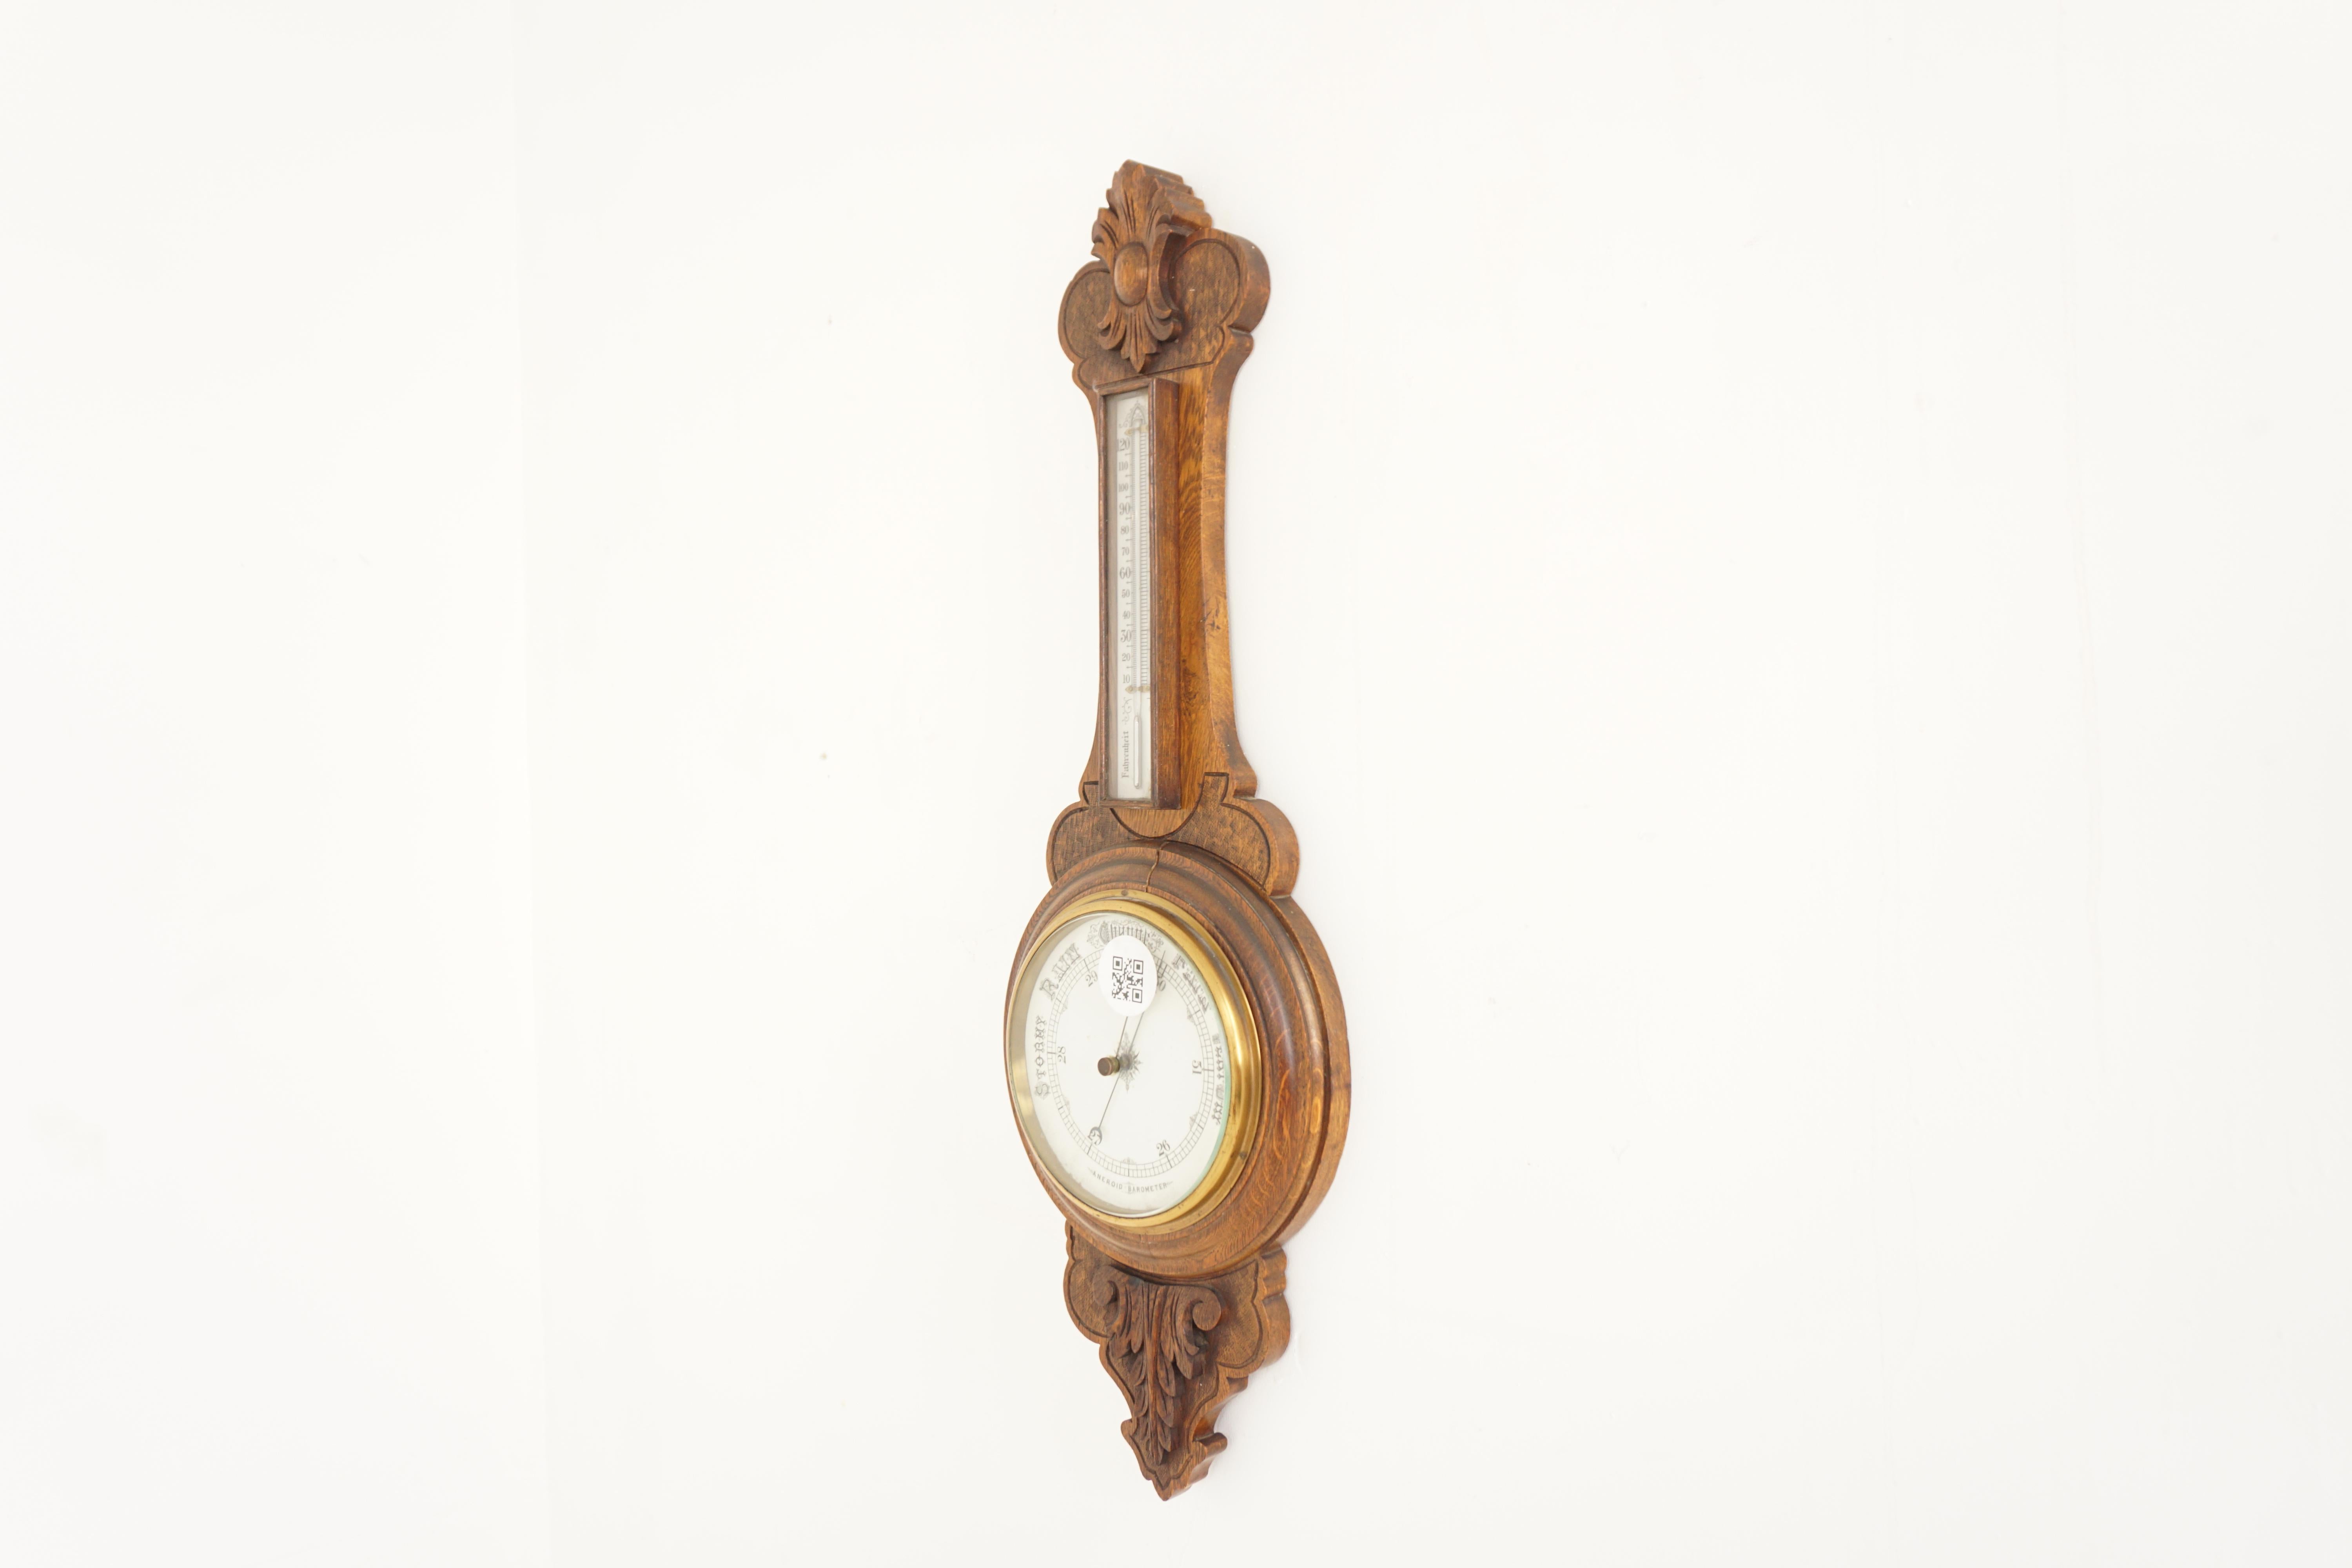 Ant. Victorian carved oak aneroid barometer, Scotland 1900, H854

Scotland 1900
Solid oak
Original finish
Oak carved floral carving on top and bottom
Barometer has a thermometer which is held in an oak glass fronted case
The porcelain dial is